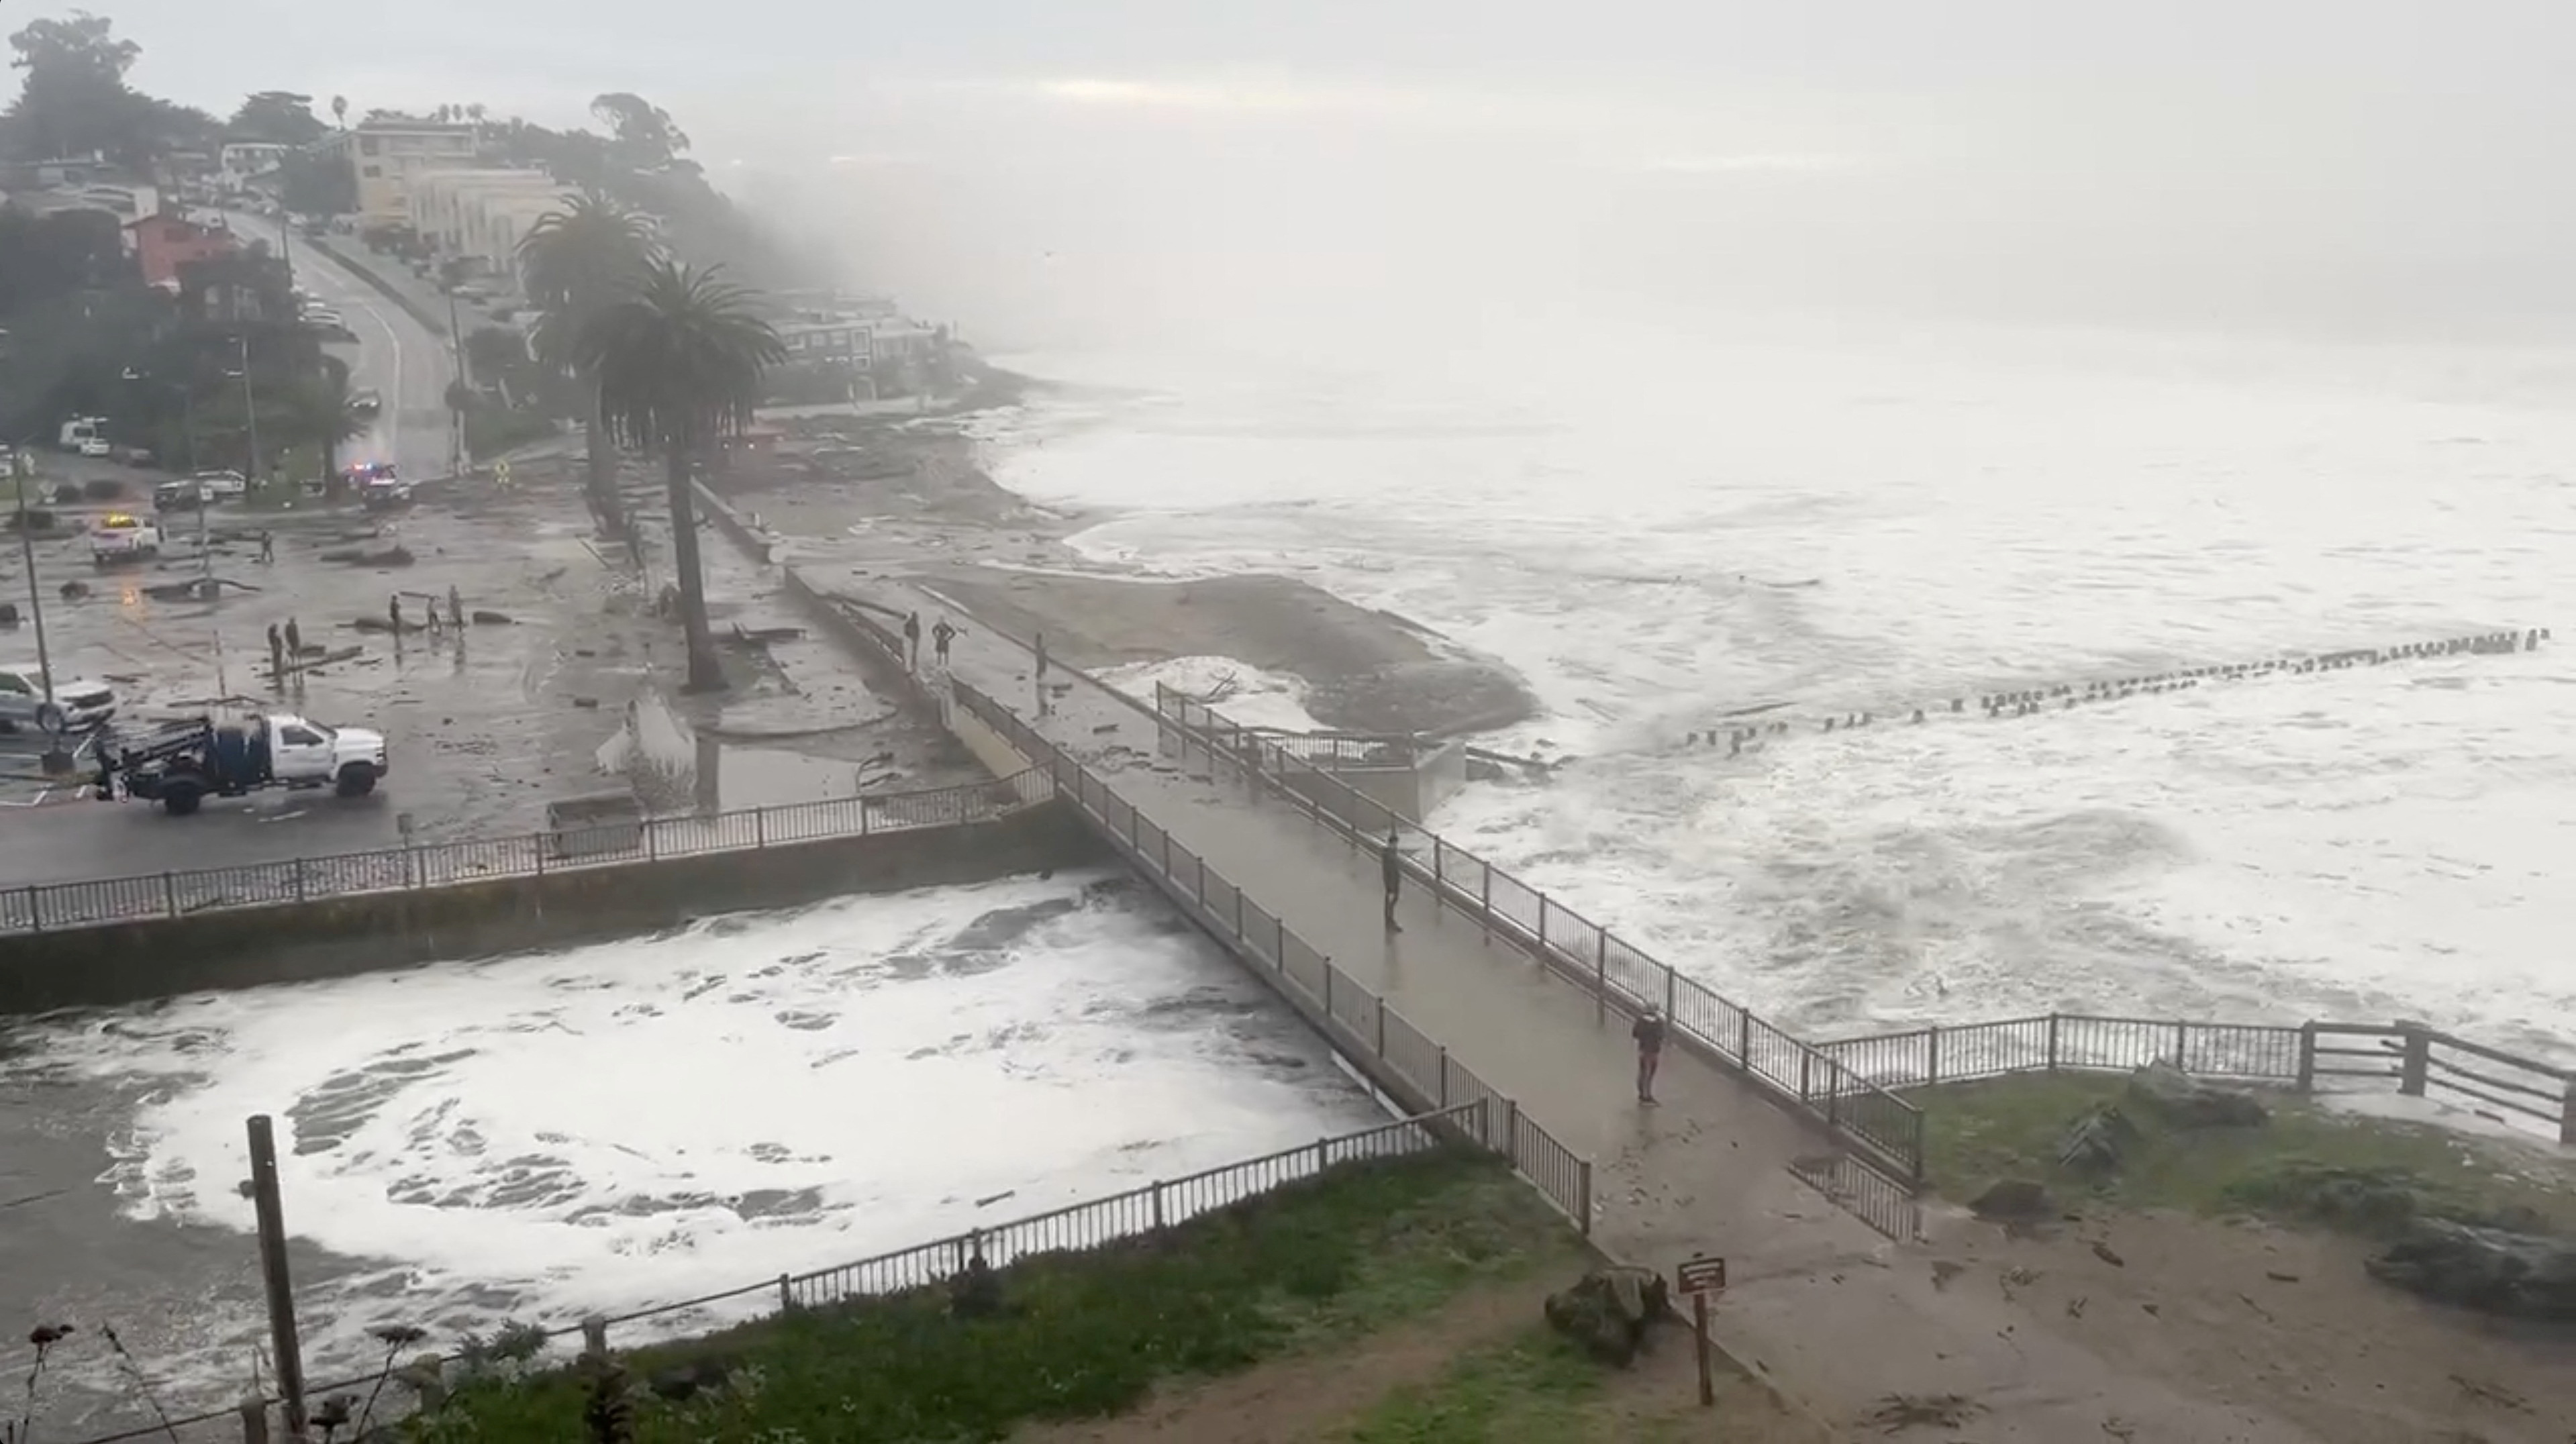 More Giant Waves and Rain Forecast for California Coast - The New